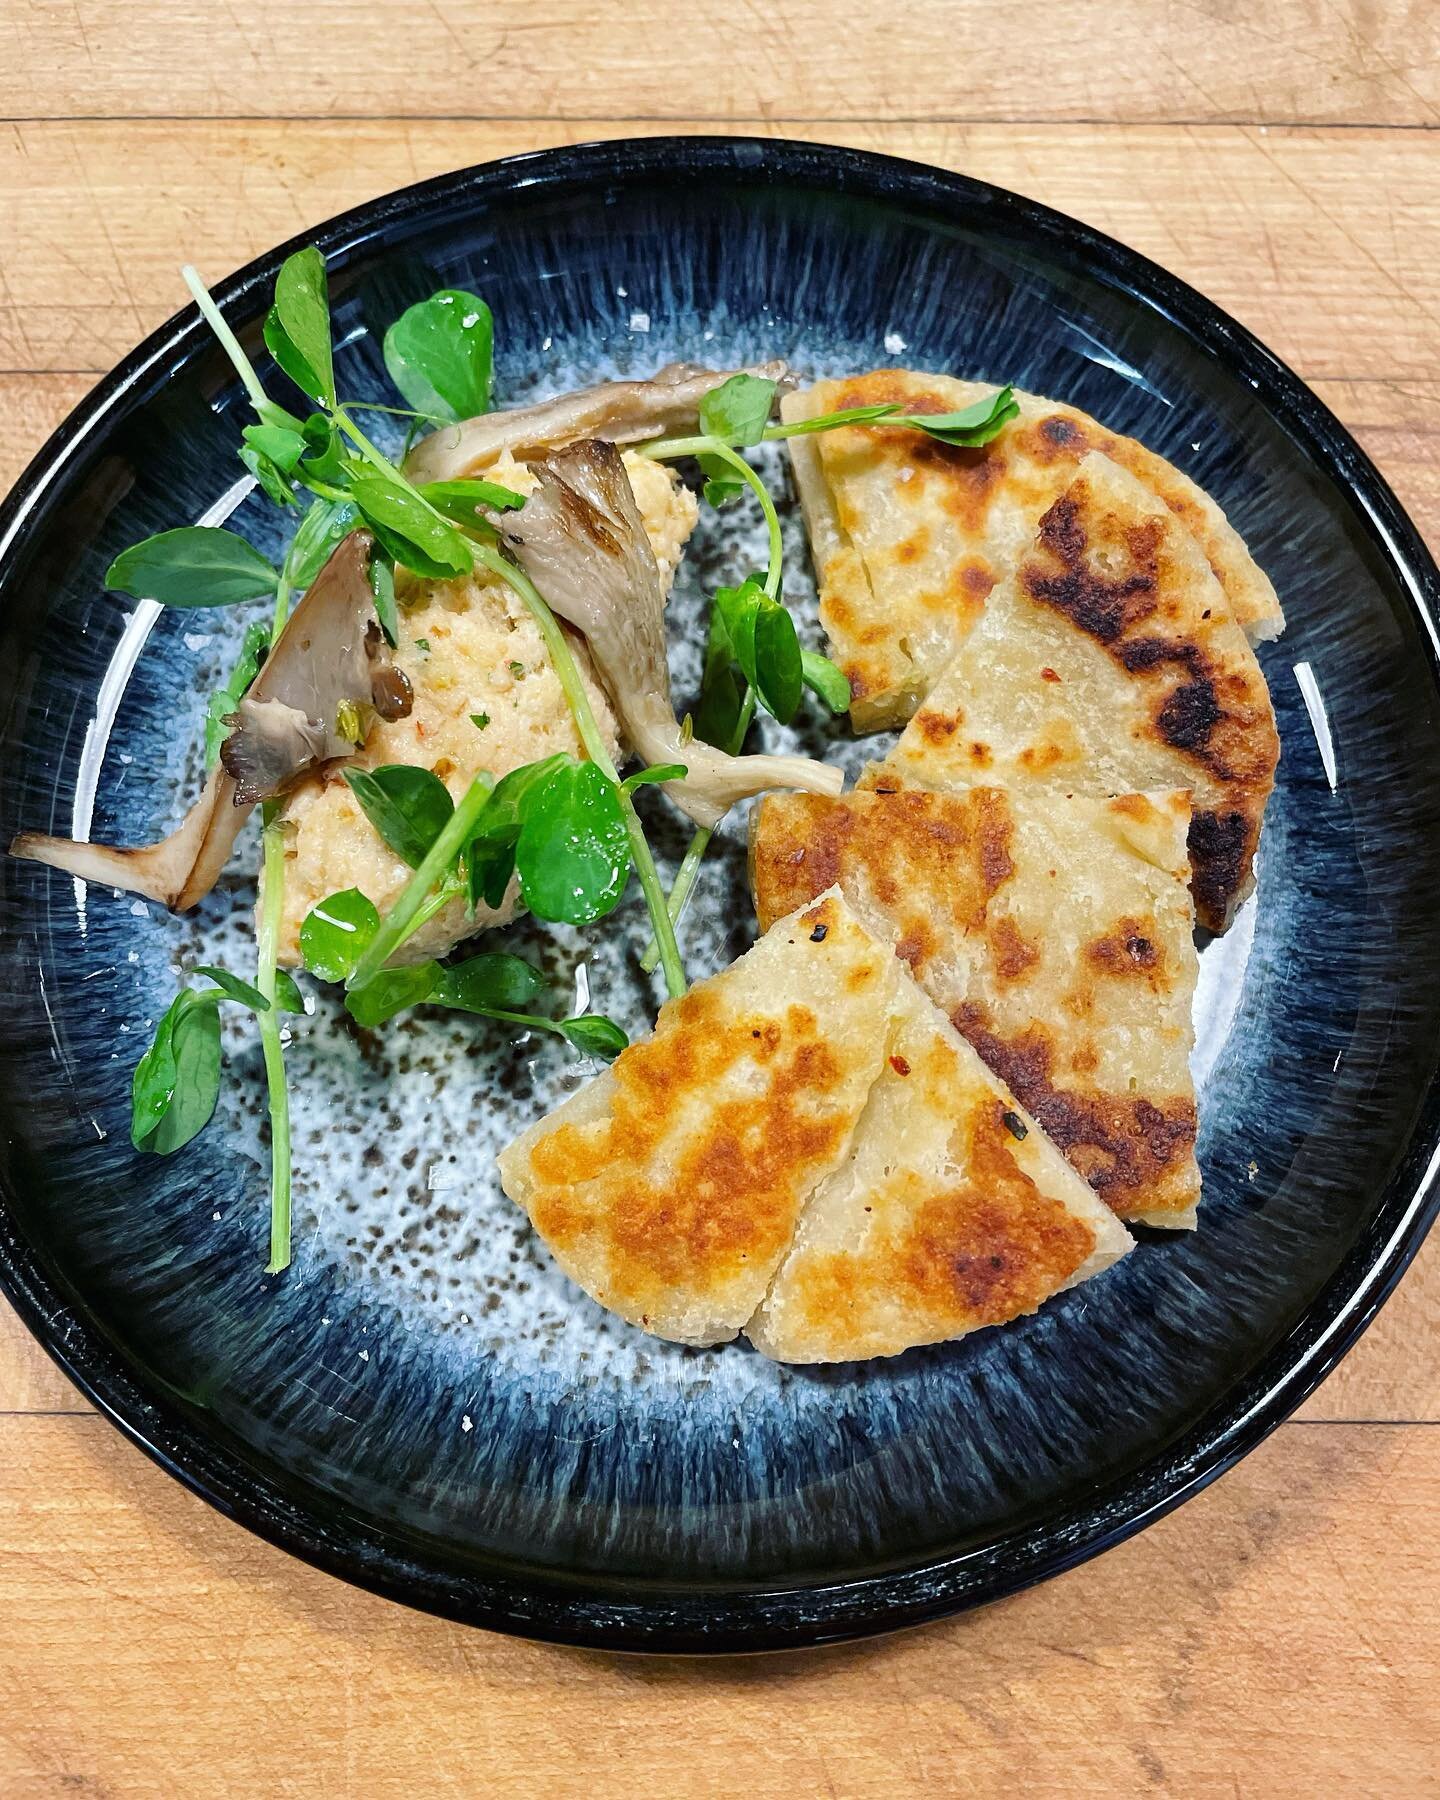 scallion pancake, salmon rillette, pickled oyster mushrooms. 

Reservations can be made by phone or on our website 🍄